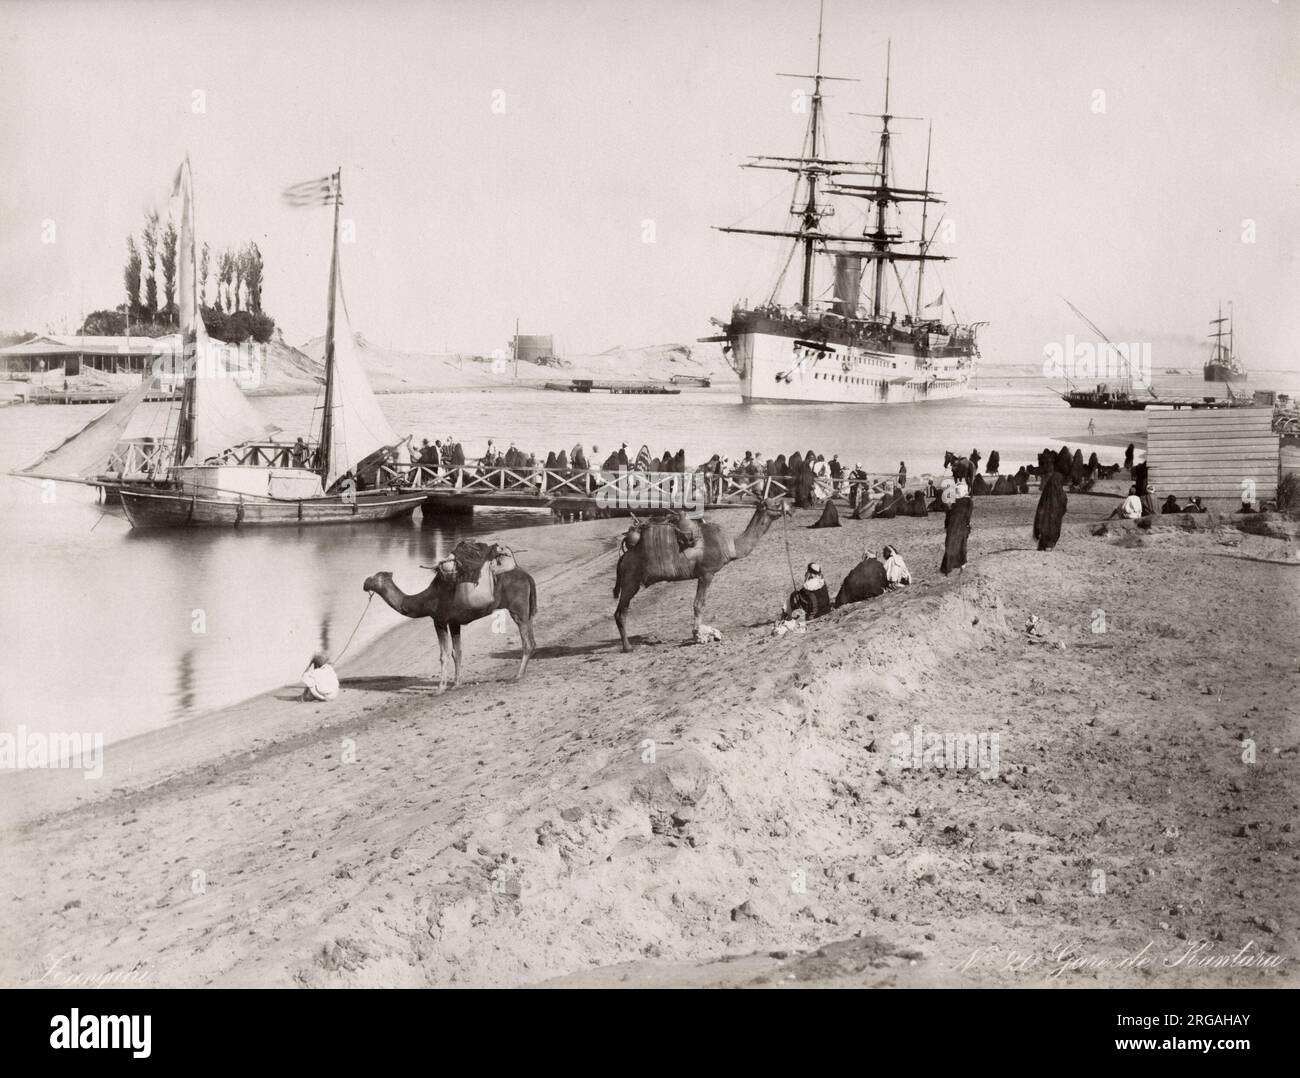 19th century vintage photograph: ship in the Suez Canal, Egyopt. Ferry pier and boat for crossing the canal, camels in the foreground. Stock Photo